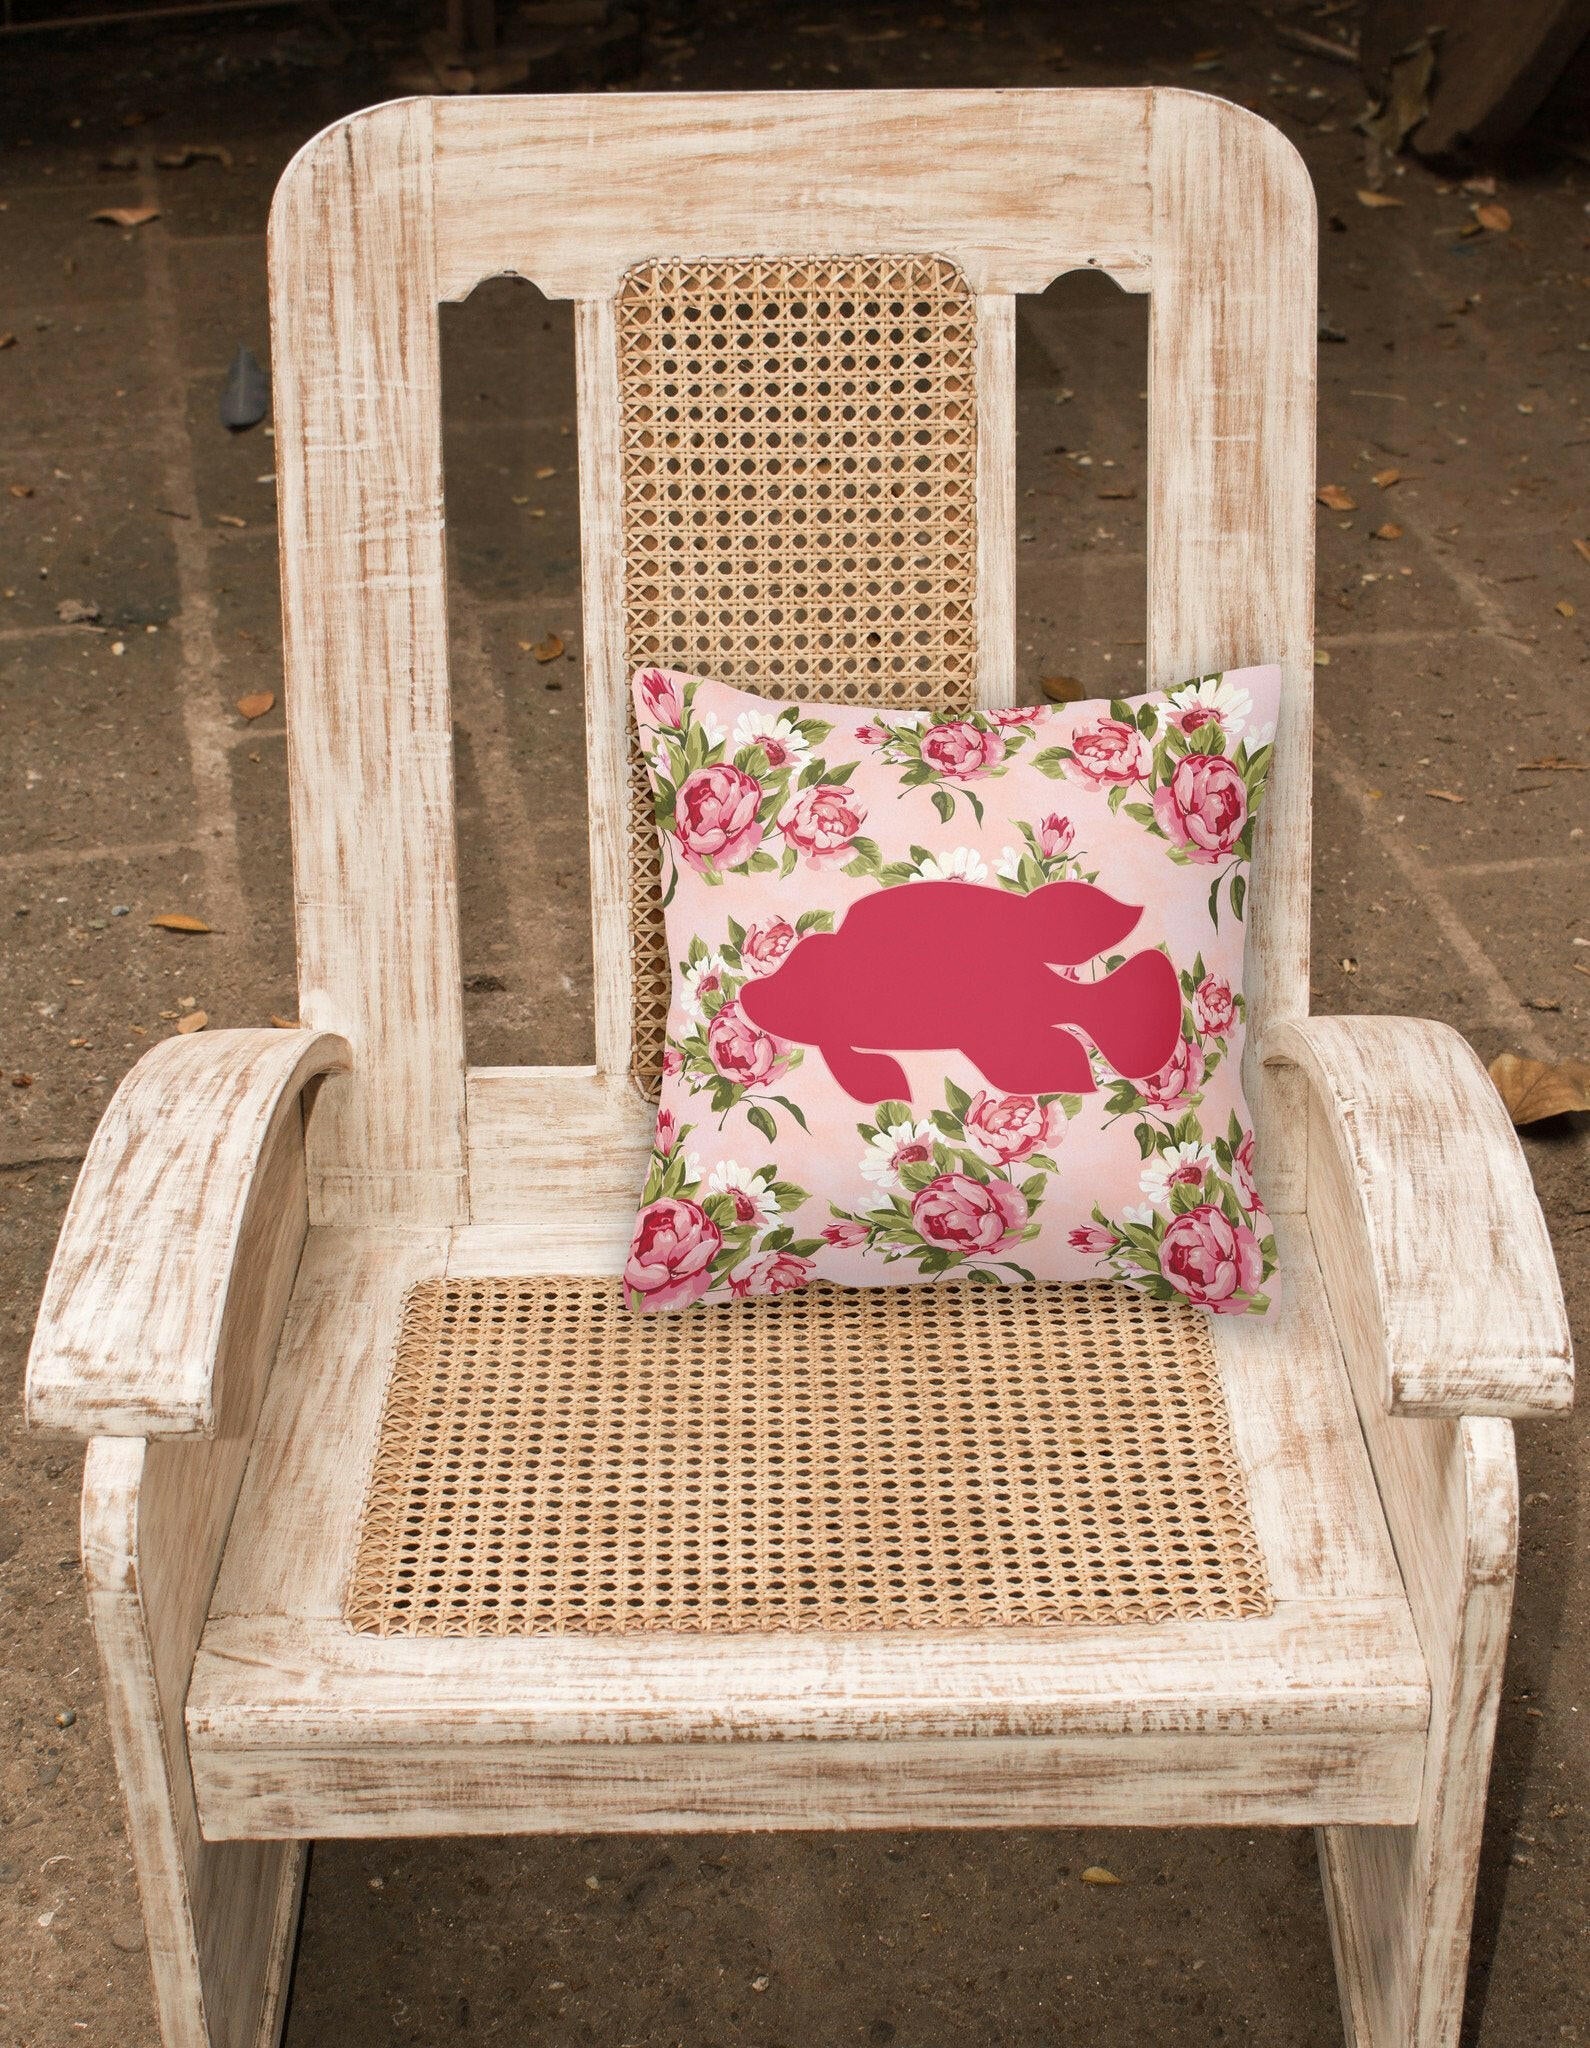 Fish - Tropical Fish Shabby Chic Pink Roses  Fabric Decorative Pillow BB1013-RS-PK-PW1414 - the-store.com